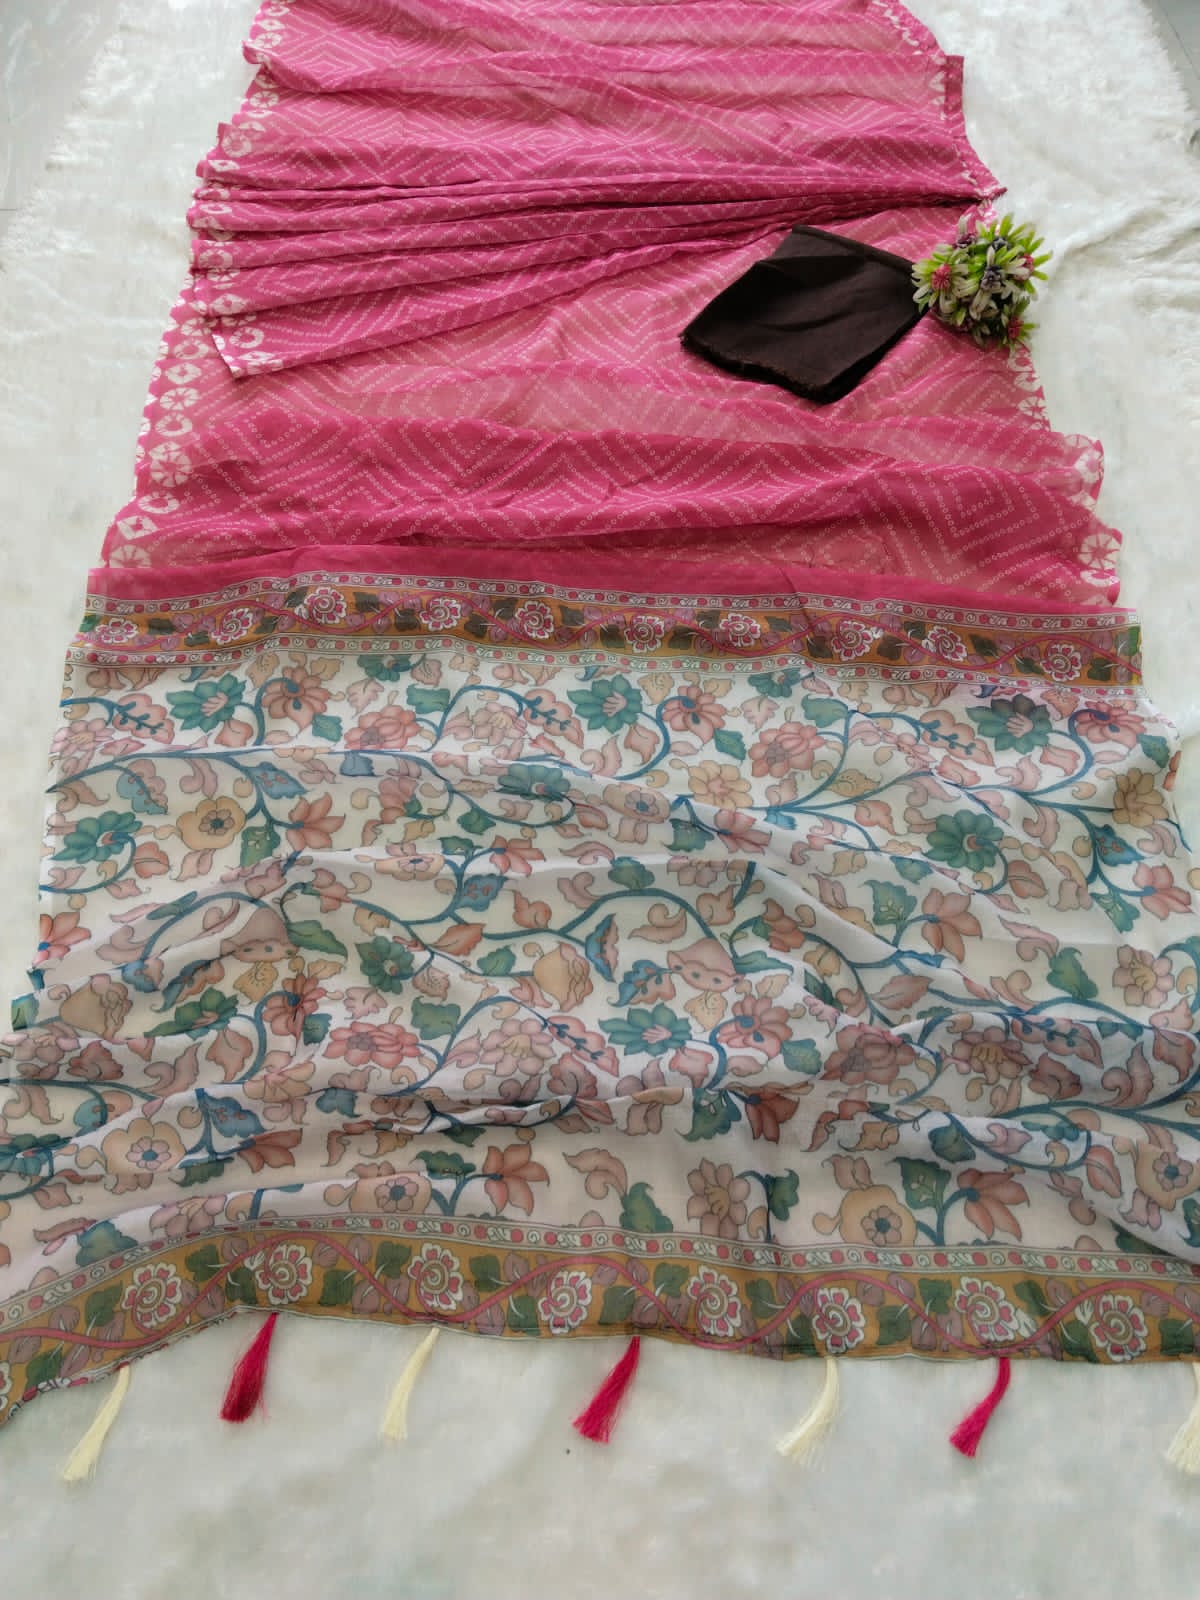 1 Min Ready To Wear Saree In Imported Butti Chiffon With Heavy Blouse